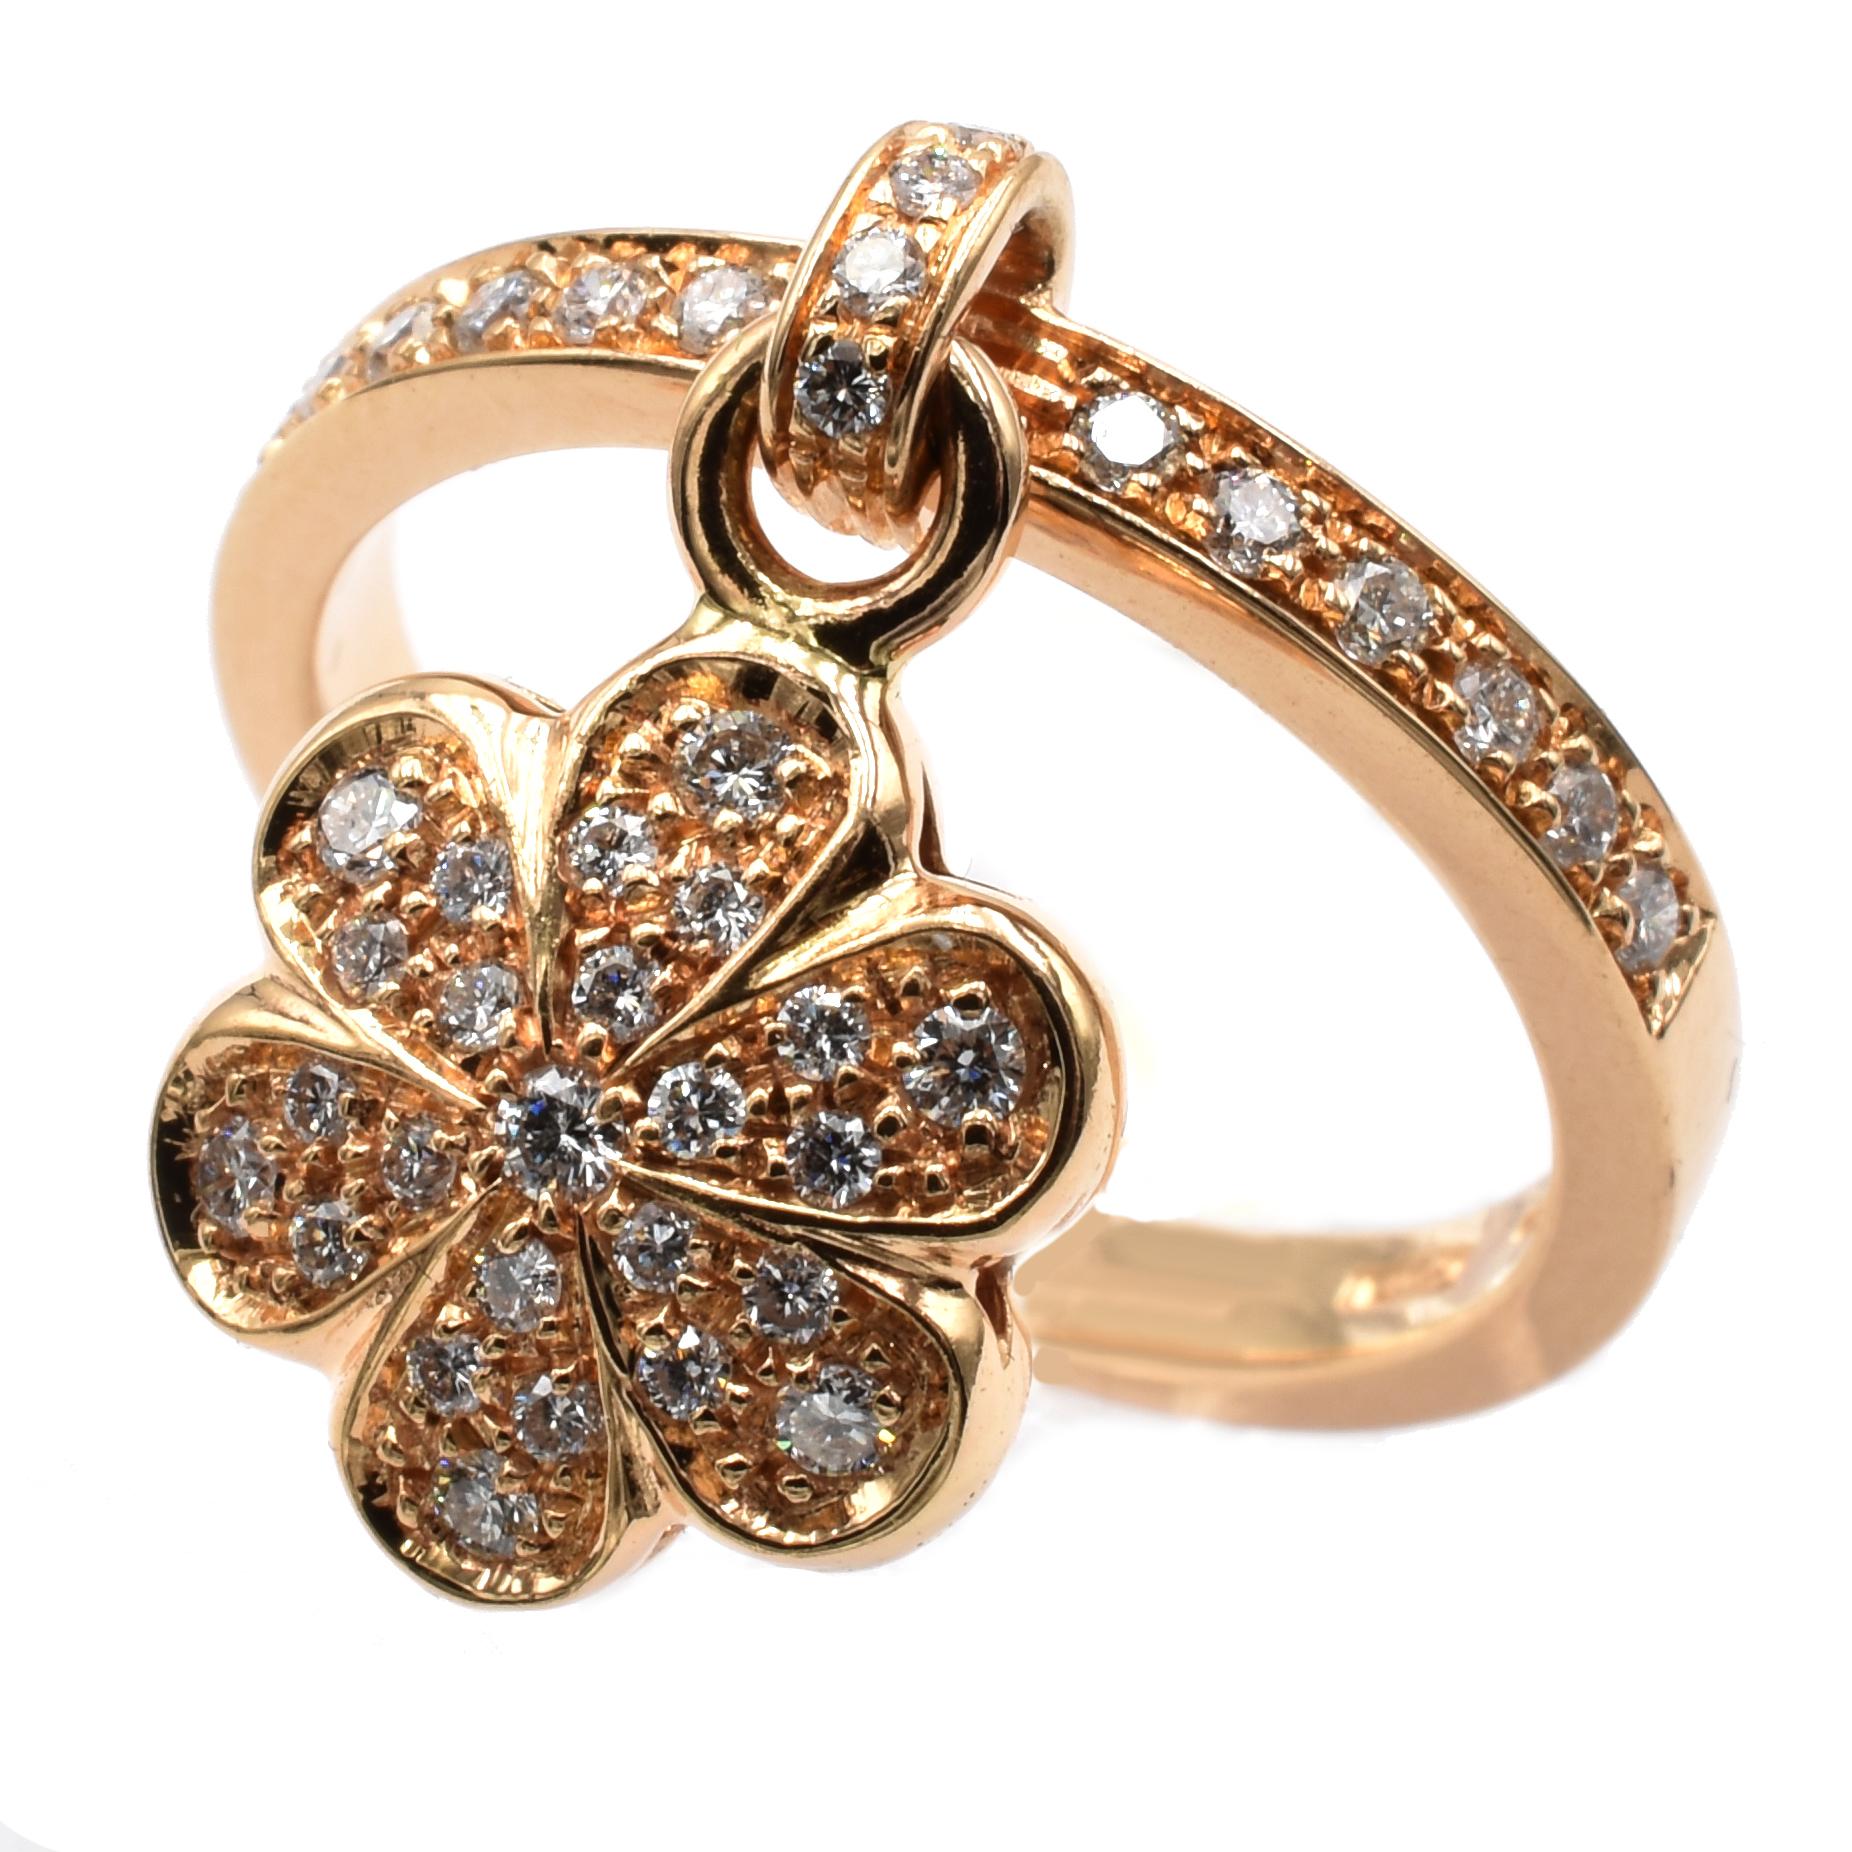 Gilberto Cassola 18 Kt Rose Gold Ring with Pendant Flower Charm. This Charm is set in both sides with White Diamonds and hangs freely on the ring.
A very Funny and Happy Piece that perfectly match with a Wedding Ring for an everyday use.
Handmade in